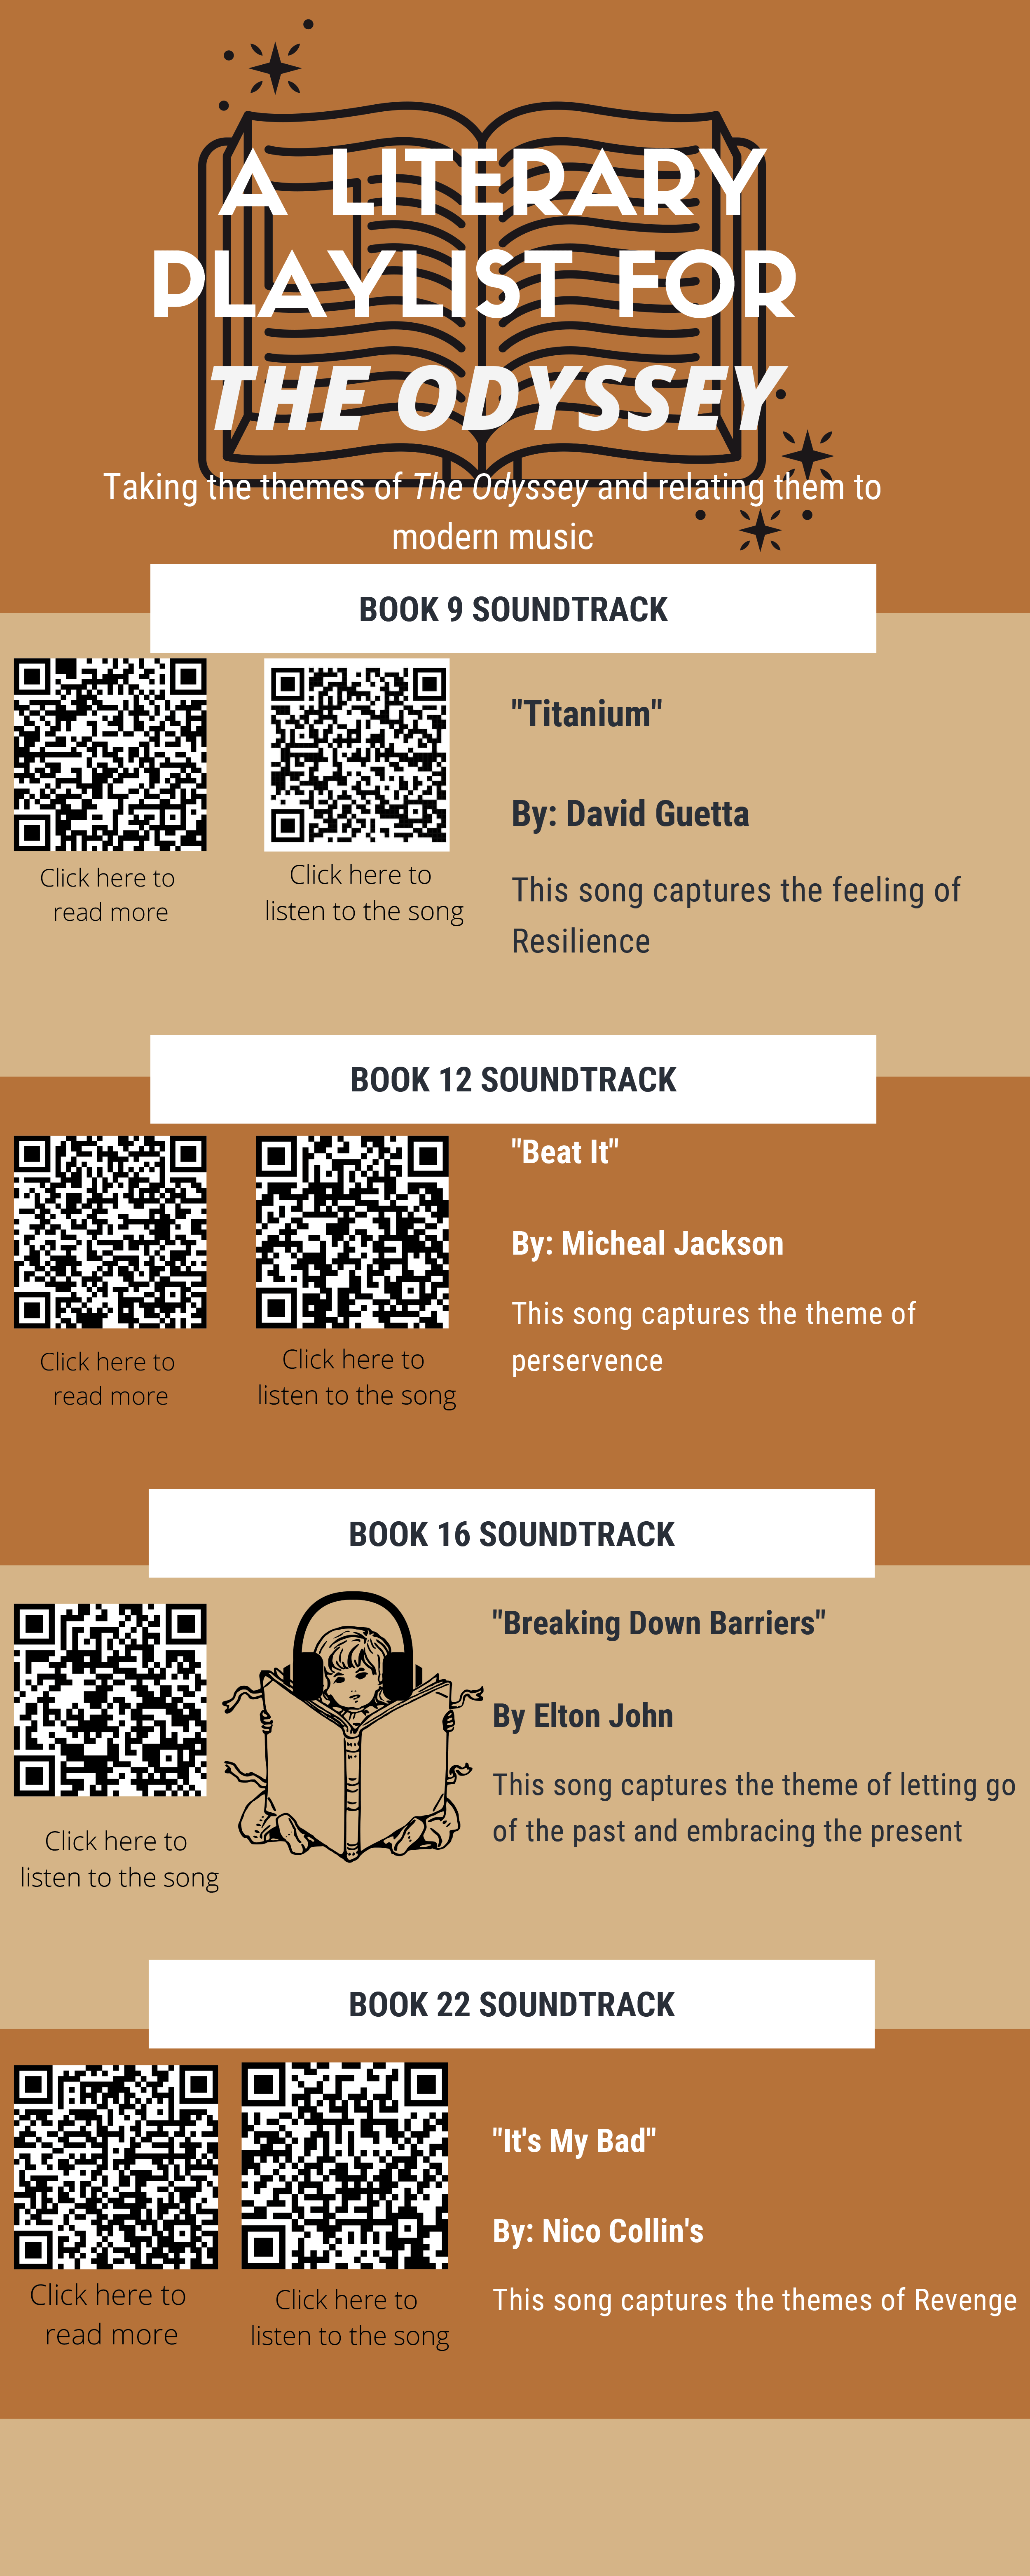 The Odyssey Infographic #5: Literary Playlist Project